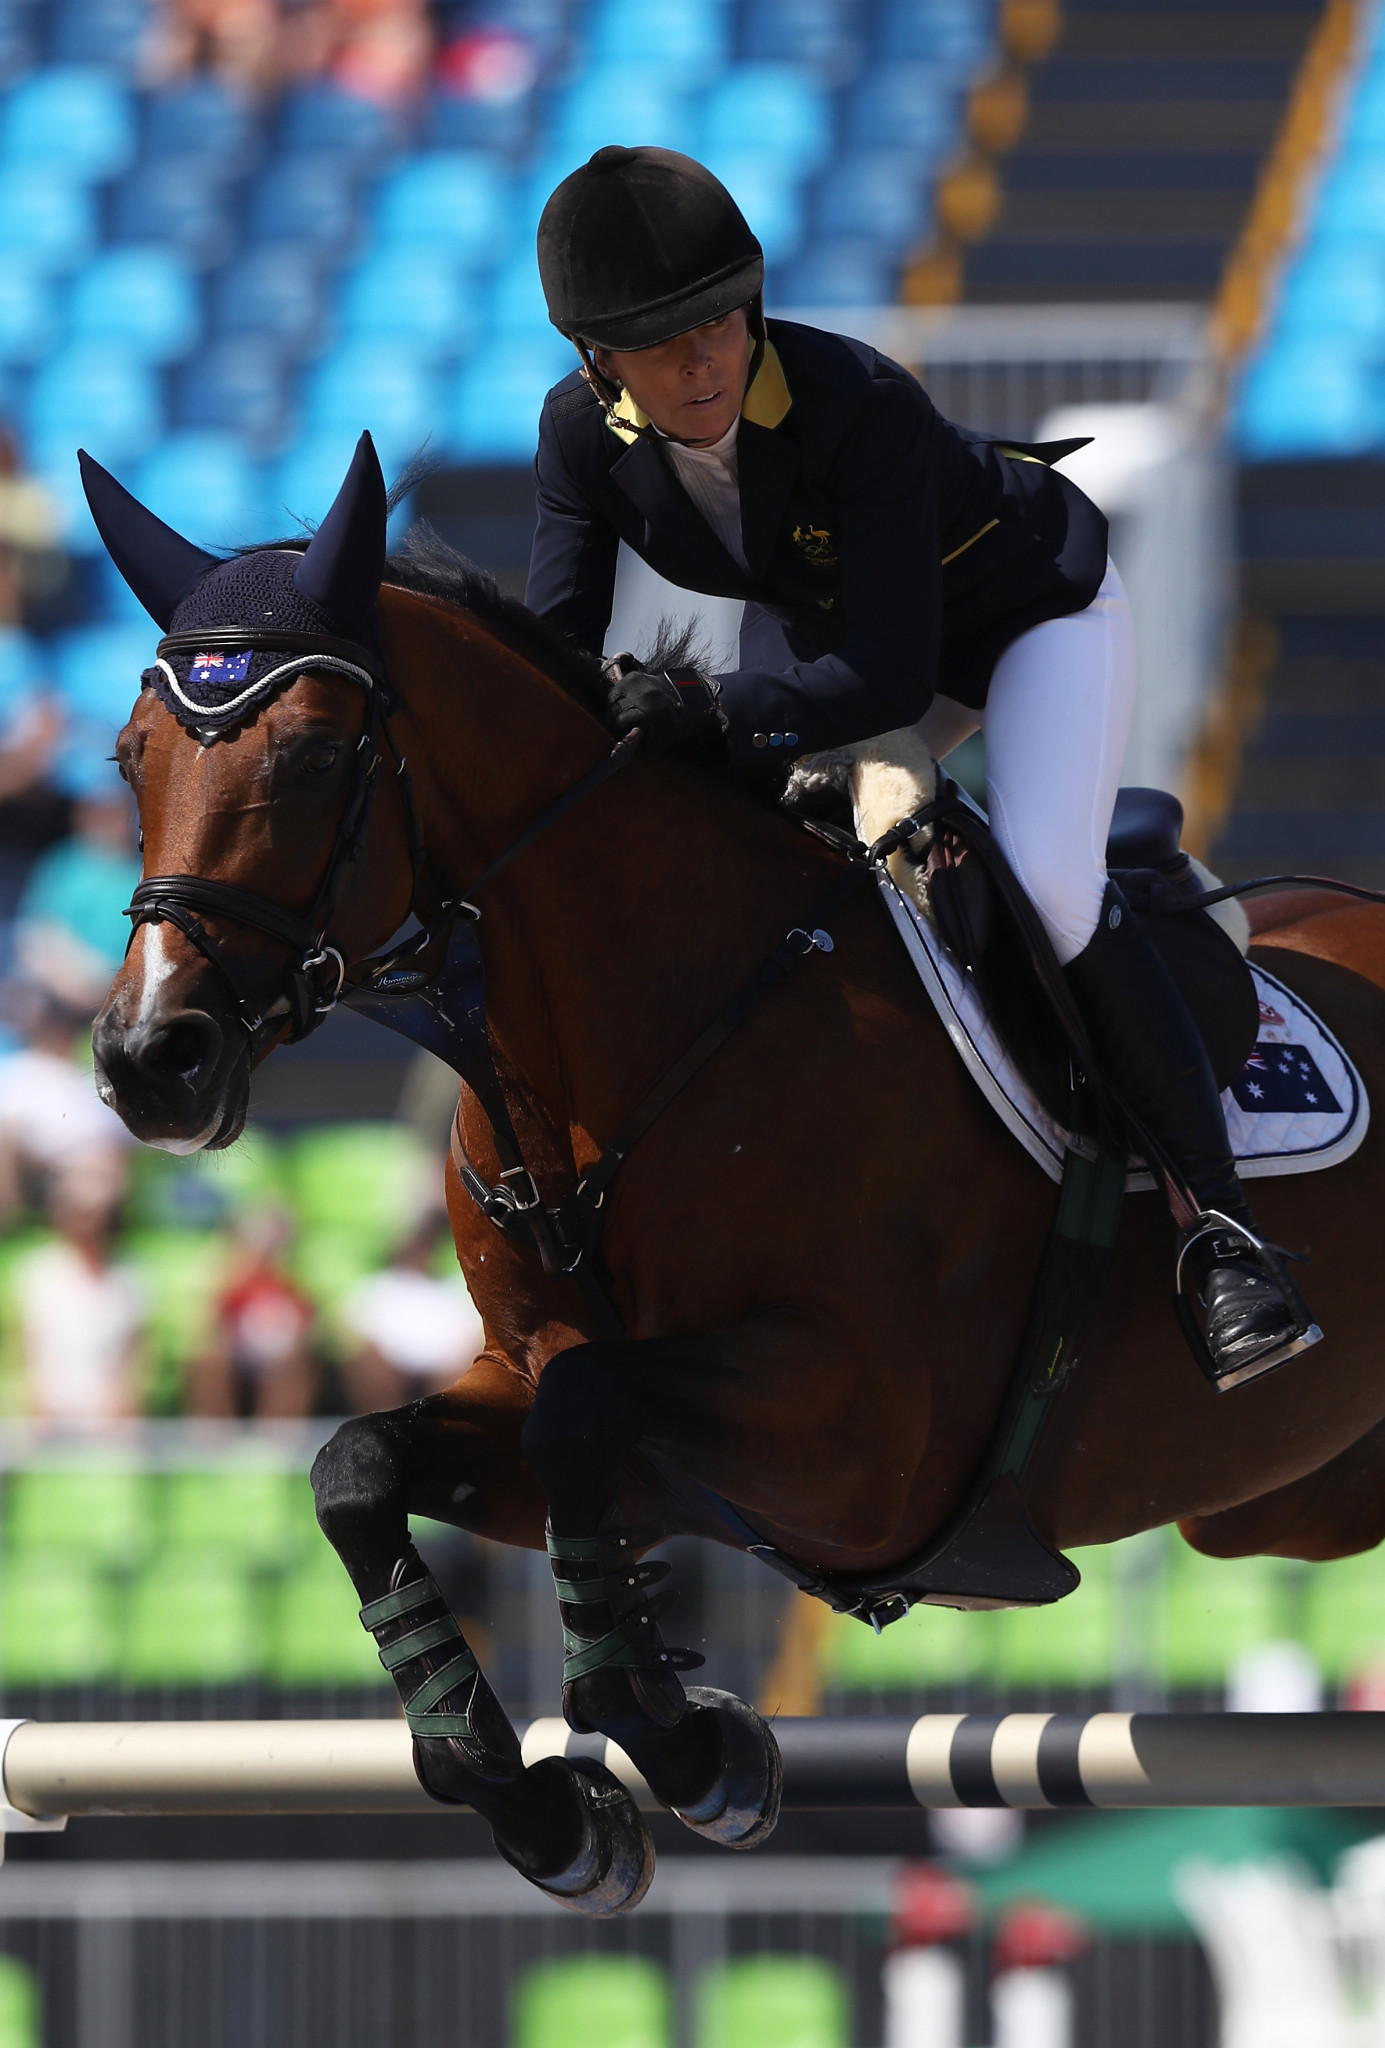 Edwina Tops-Alexander now has a share of the Western European League lead ©Getty Images